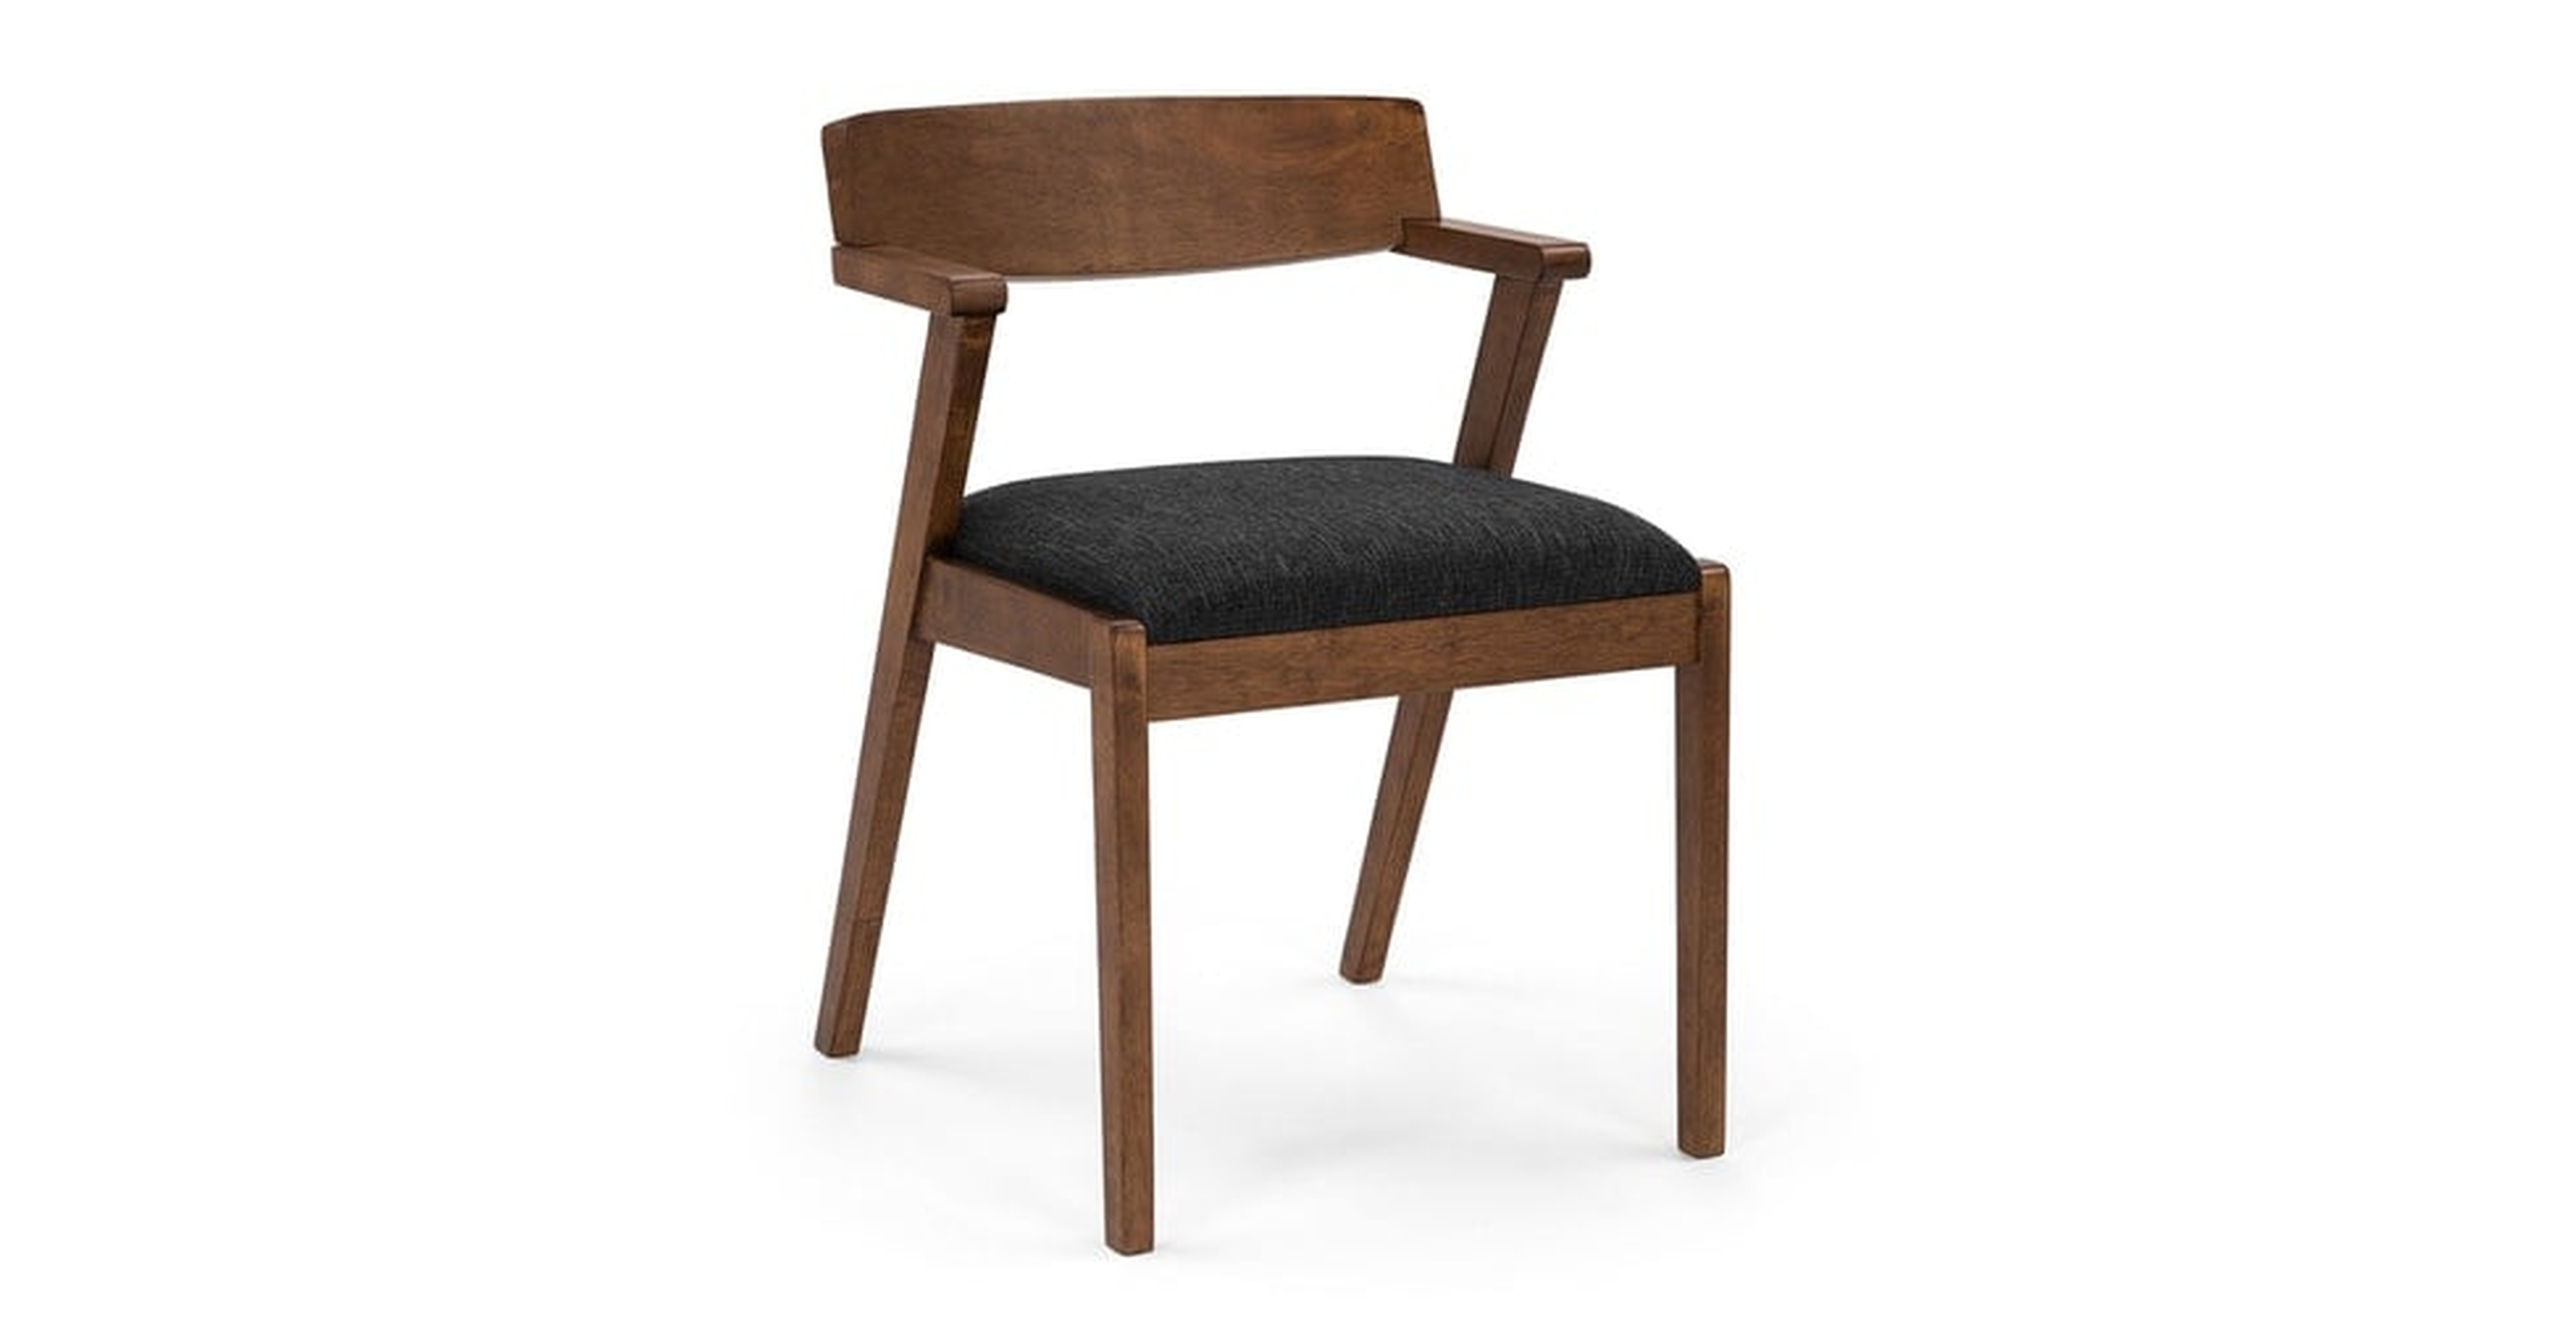 Zola Licorice Dining Chair - Article